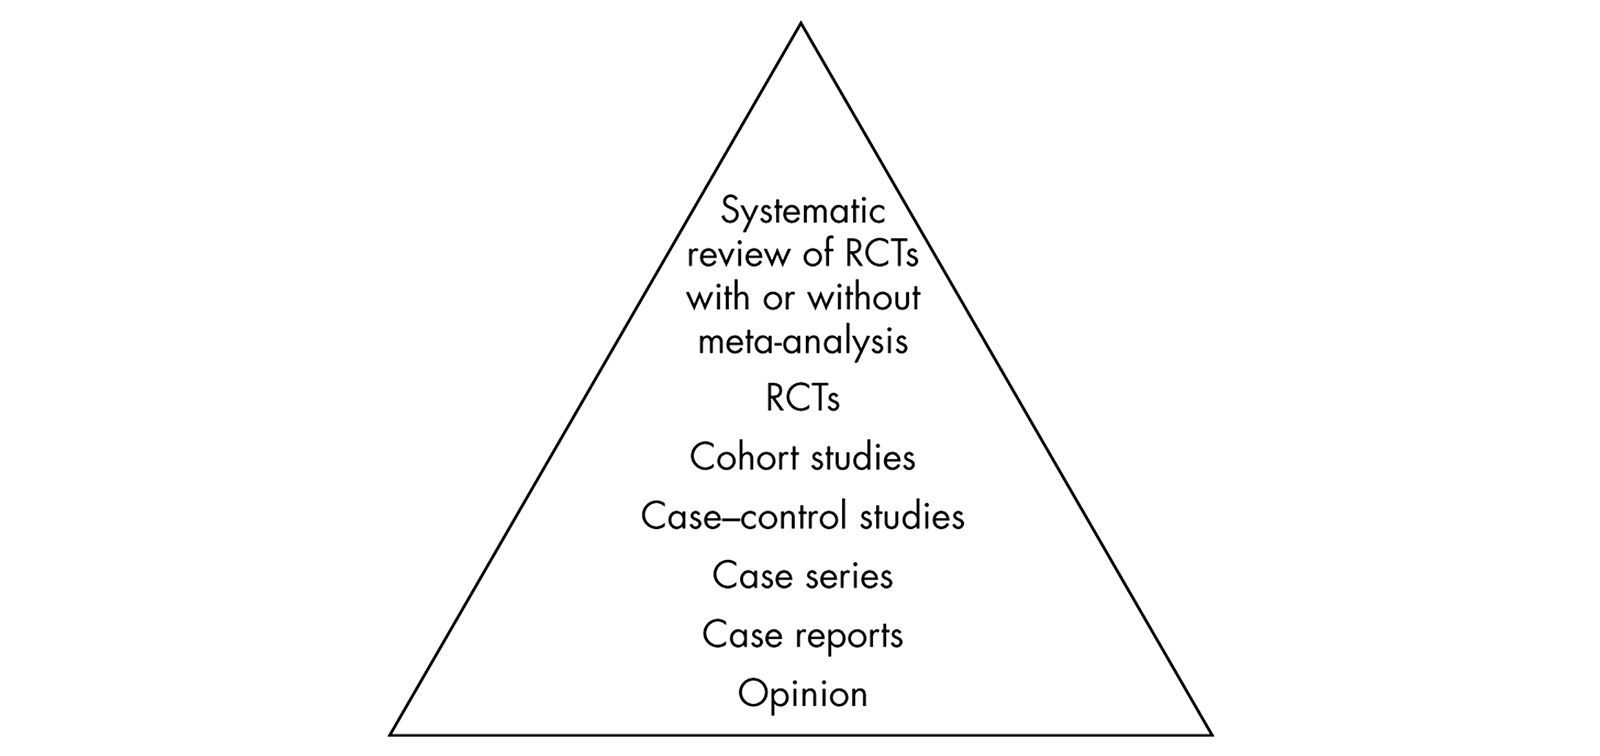 Hierarchy of evidence for questions about the effectiveness of an intervention or treatment.